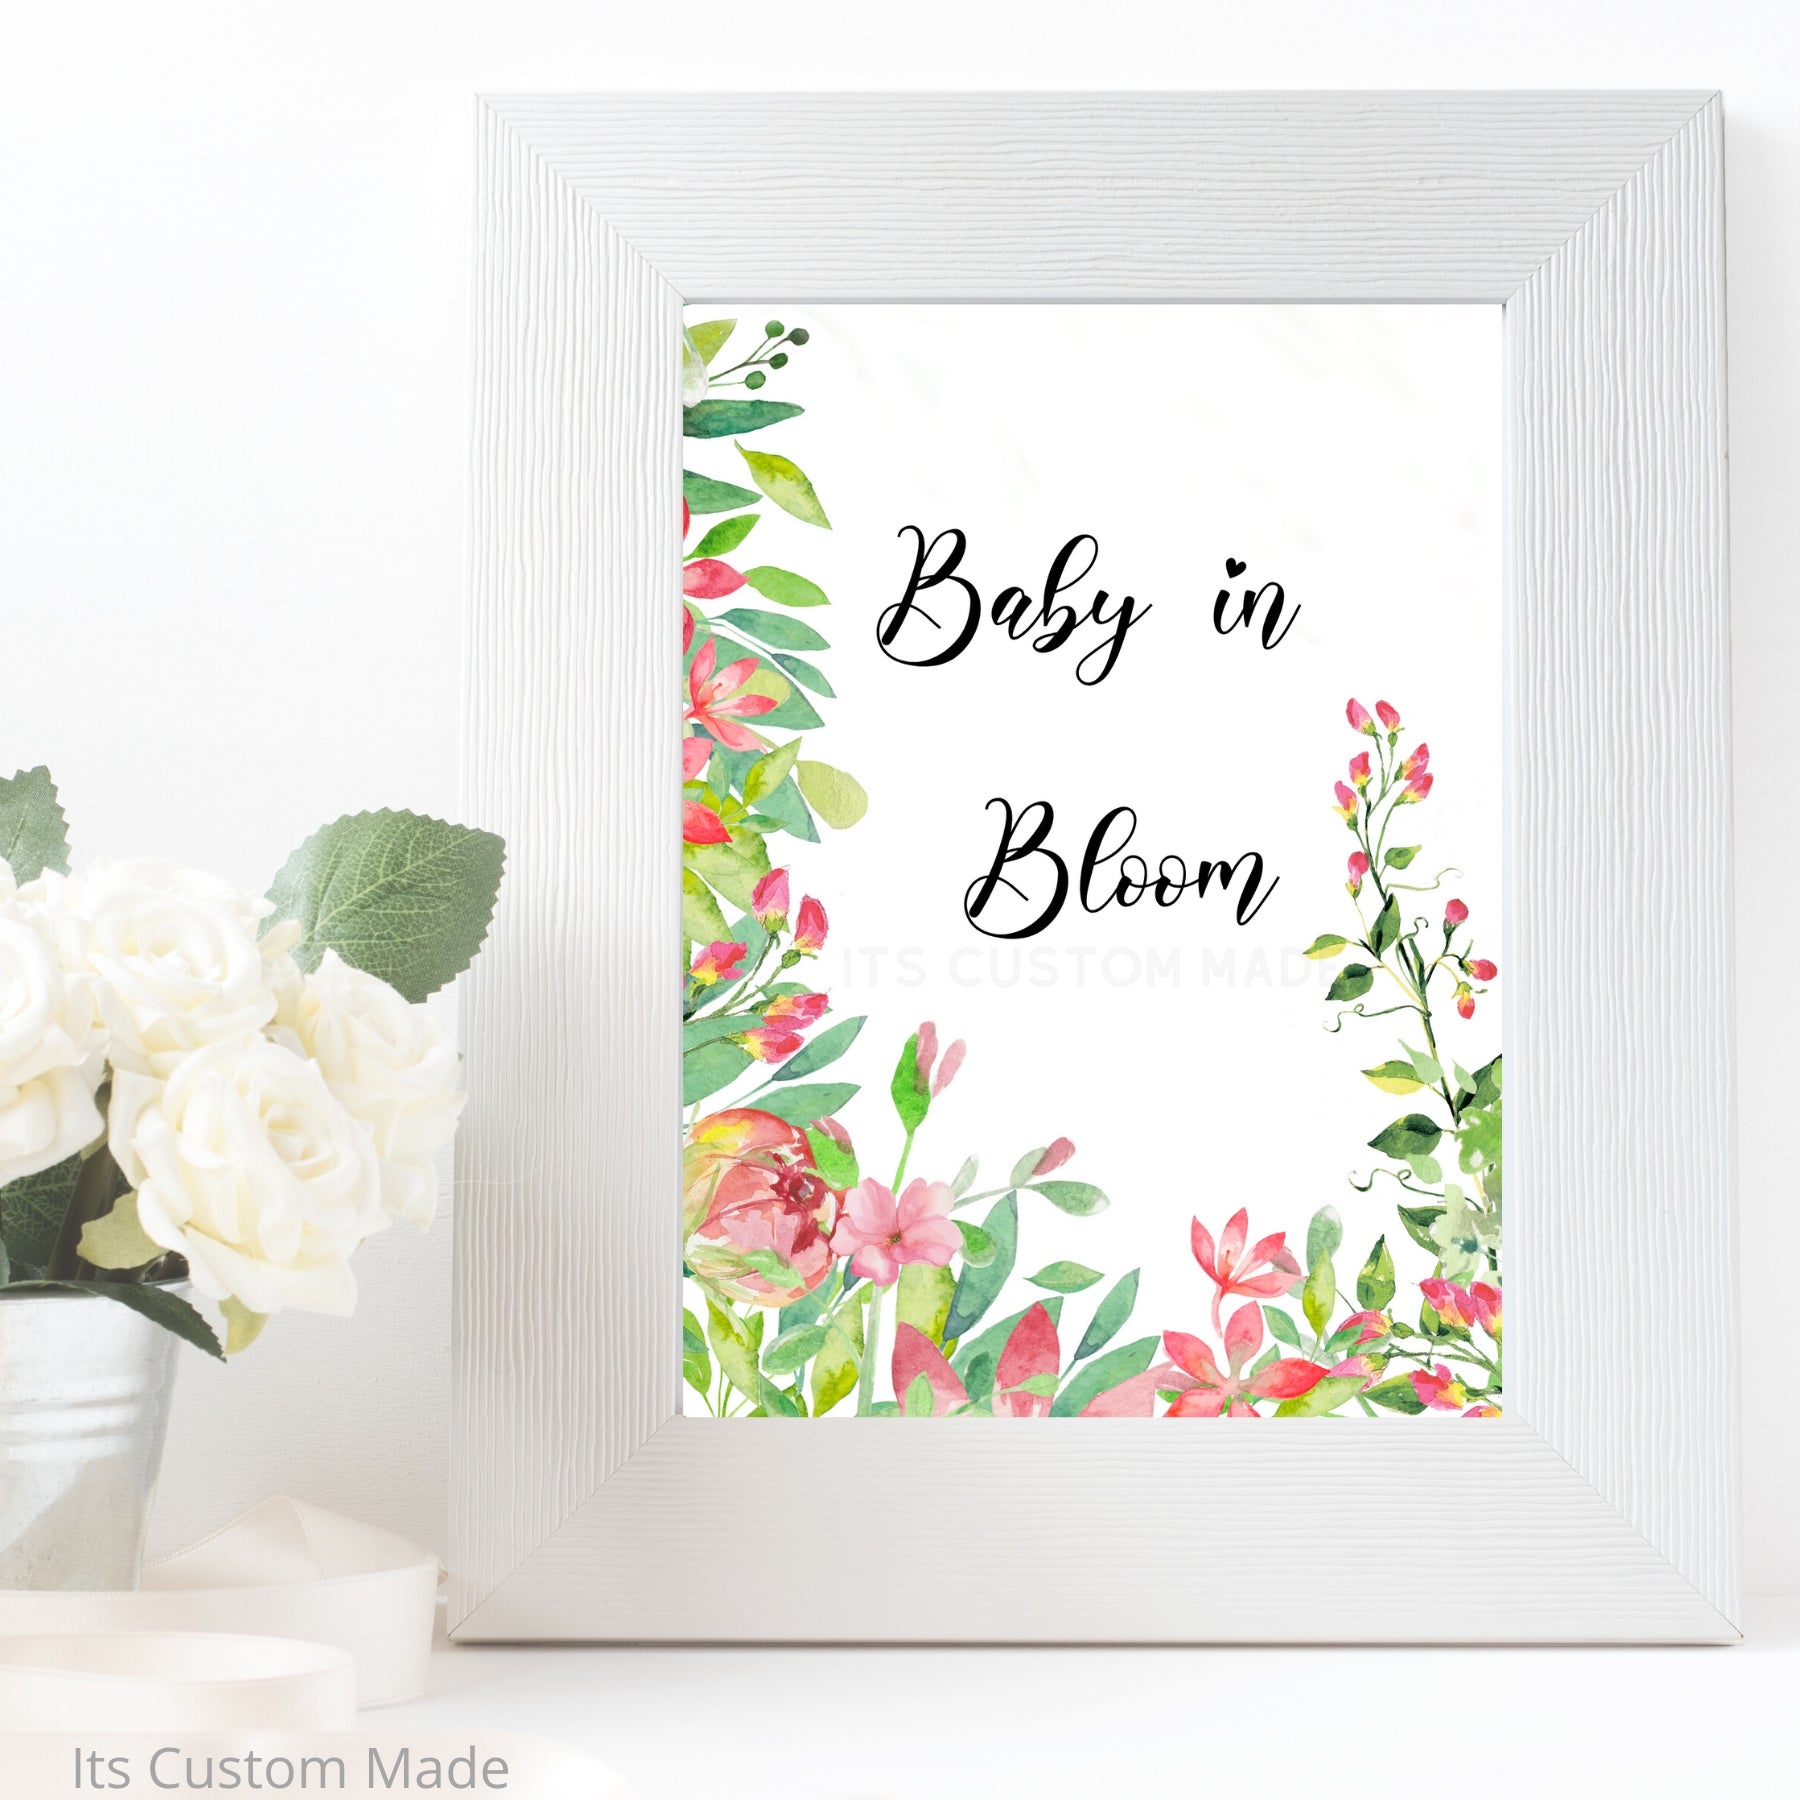 Baby in Bloom Party Wall Art Sign - French Garden Baby Shower Party Wall Art Decorations - Blue and Gold Baby Shower Printable Decor Signage - French Market Baby Shower Printable Wall Art Sign